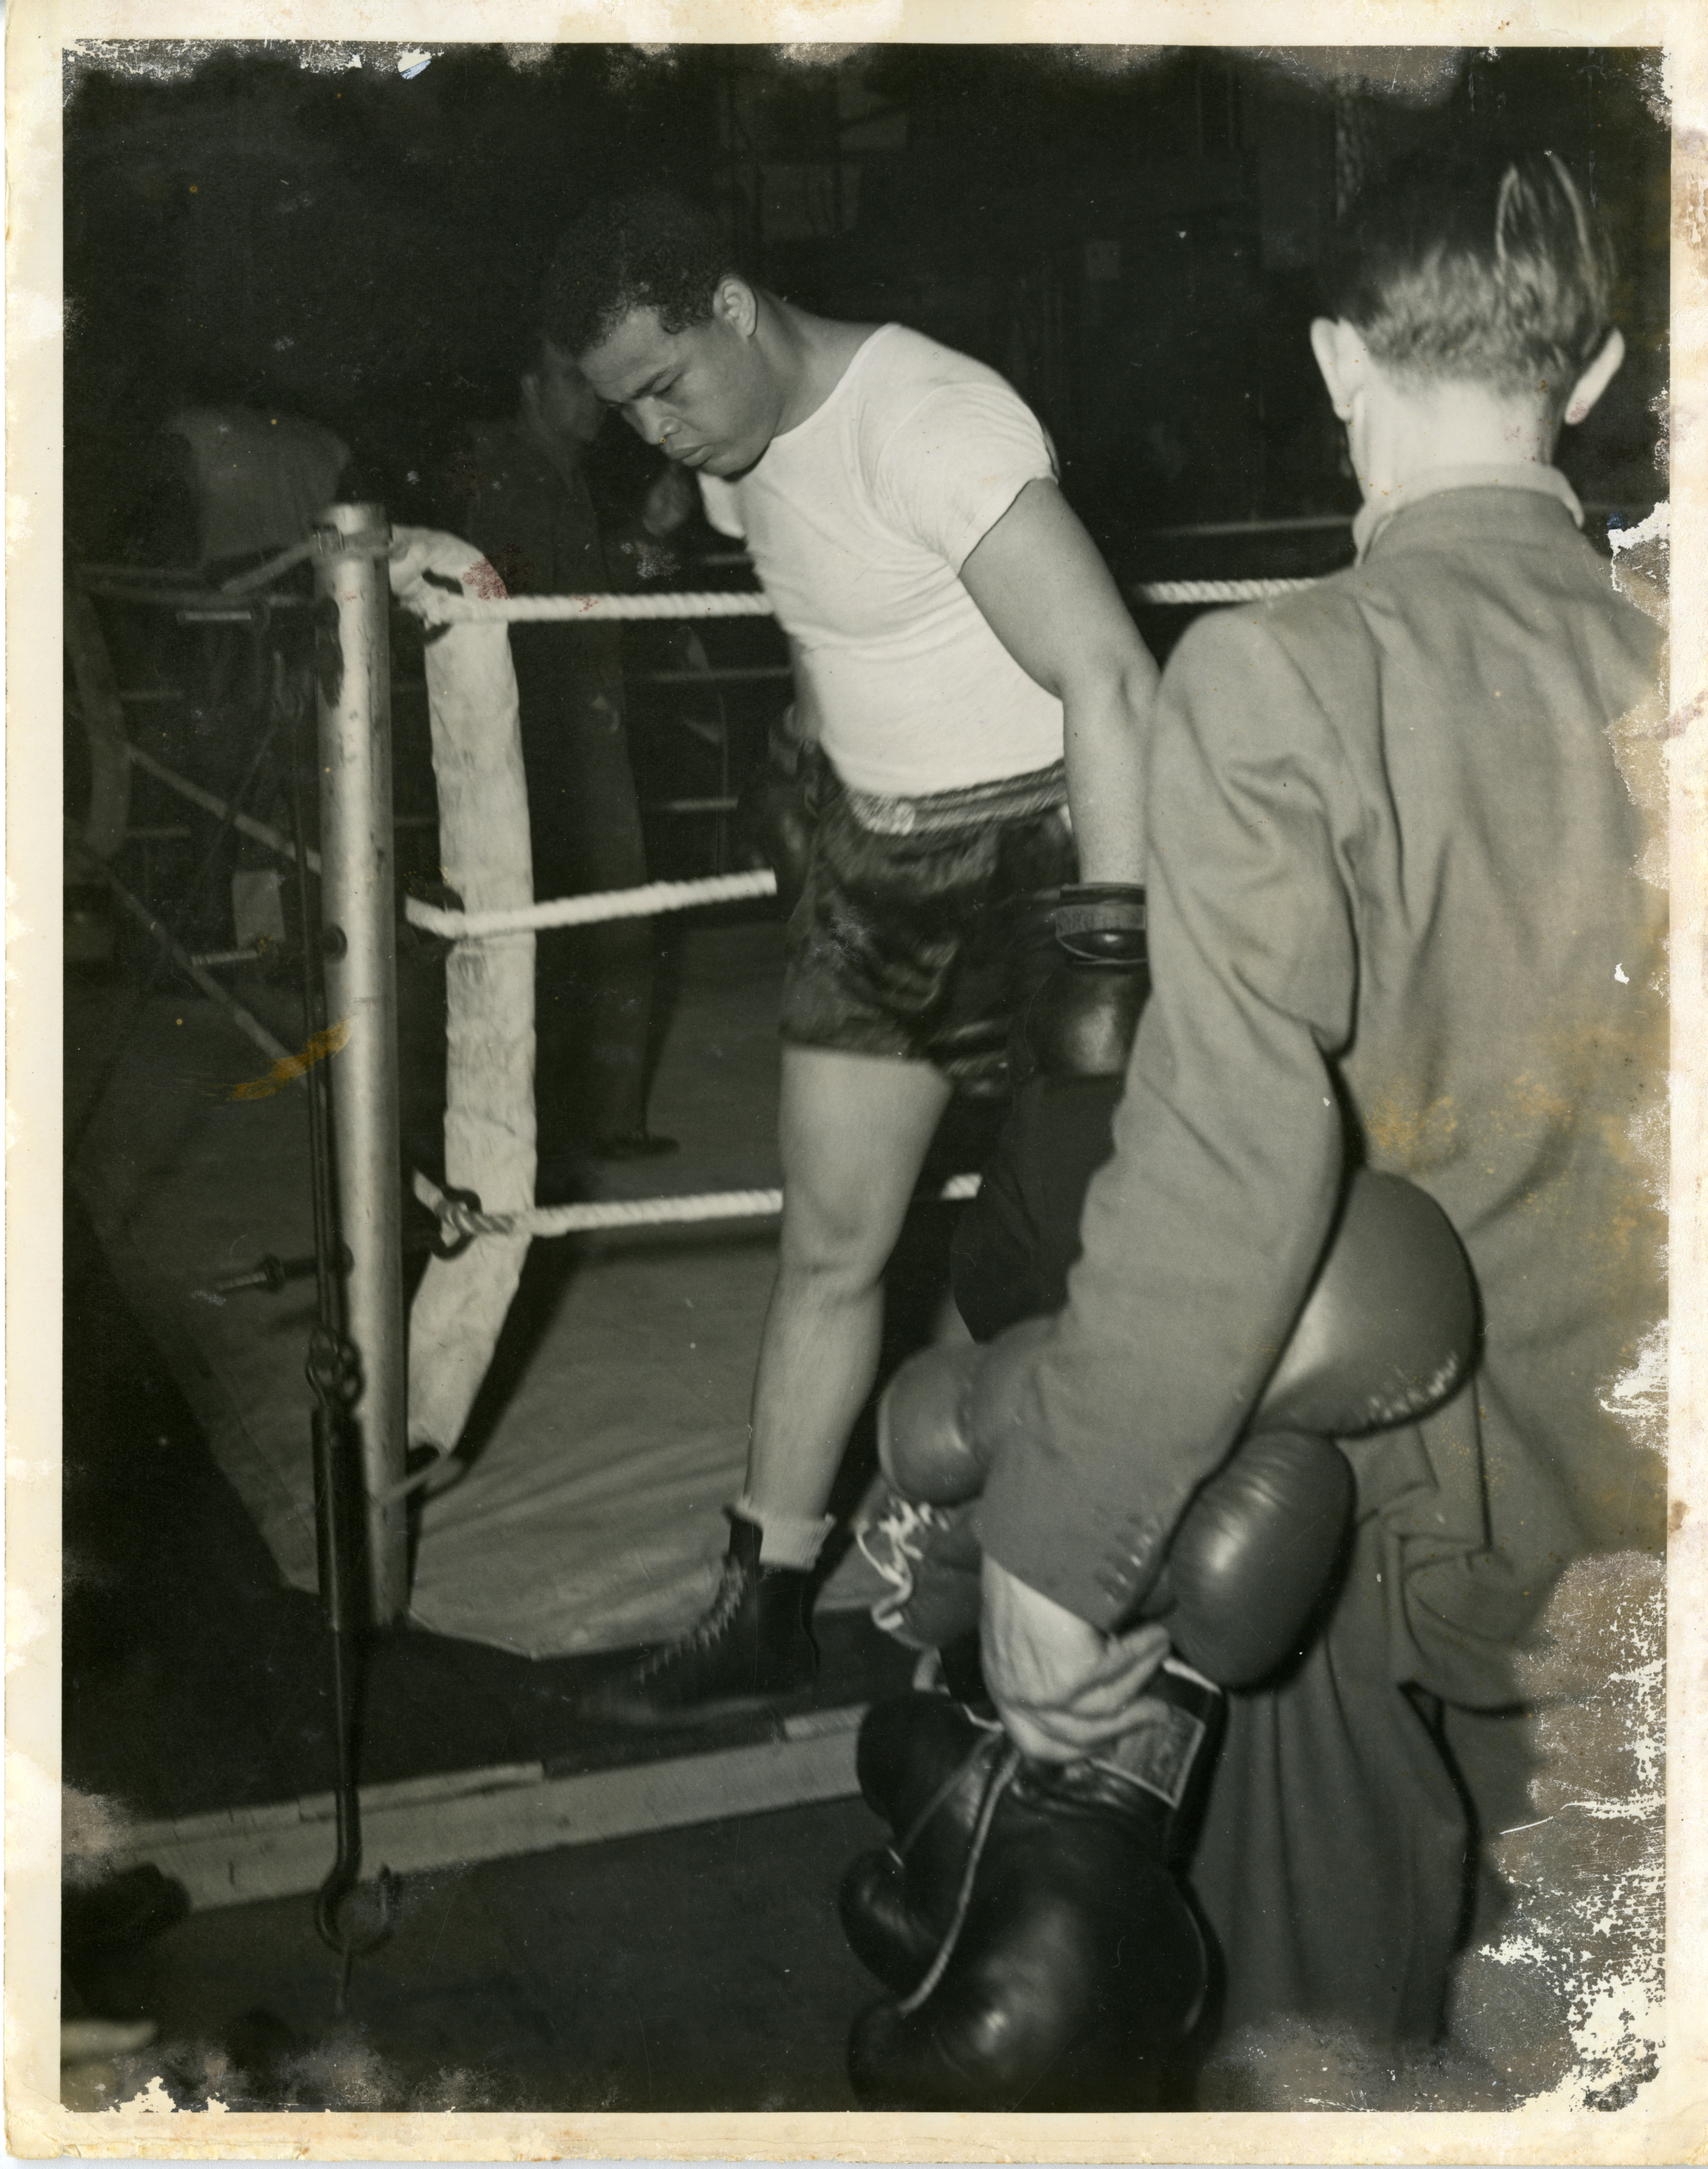 Famous boxer Joe Louis after an exhibition of his skills in London, England  on 22 June 1944